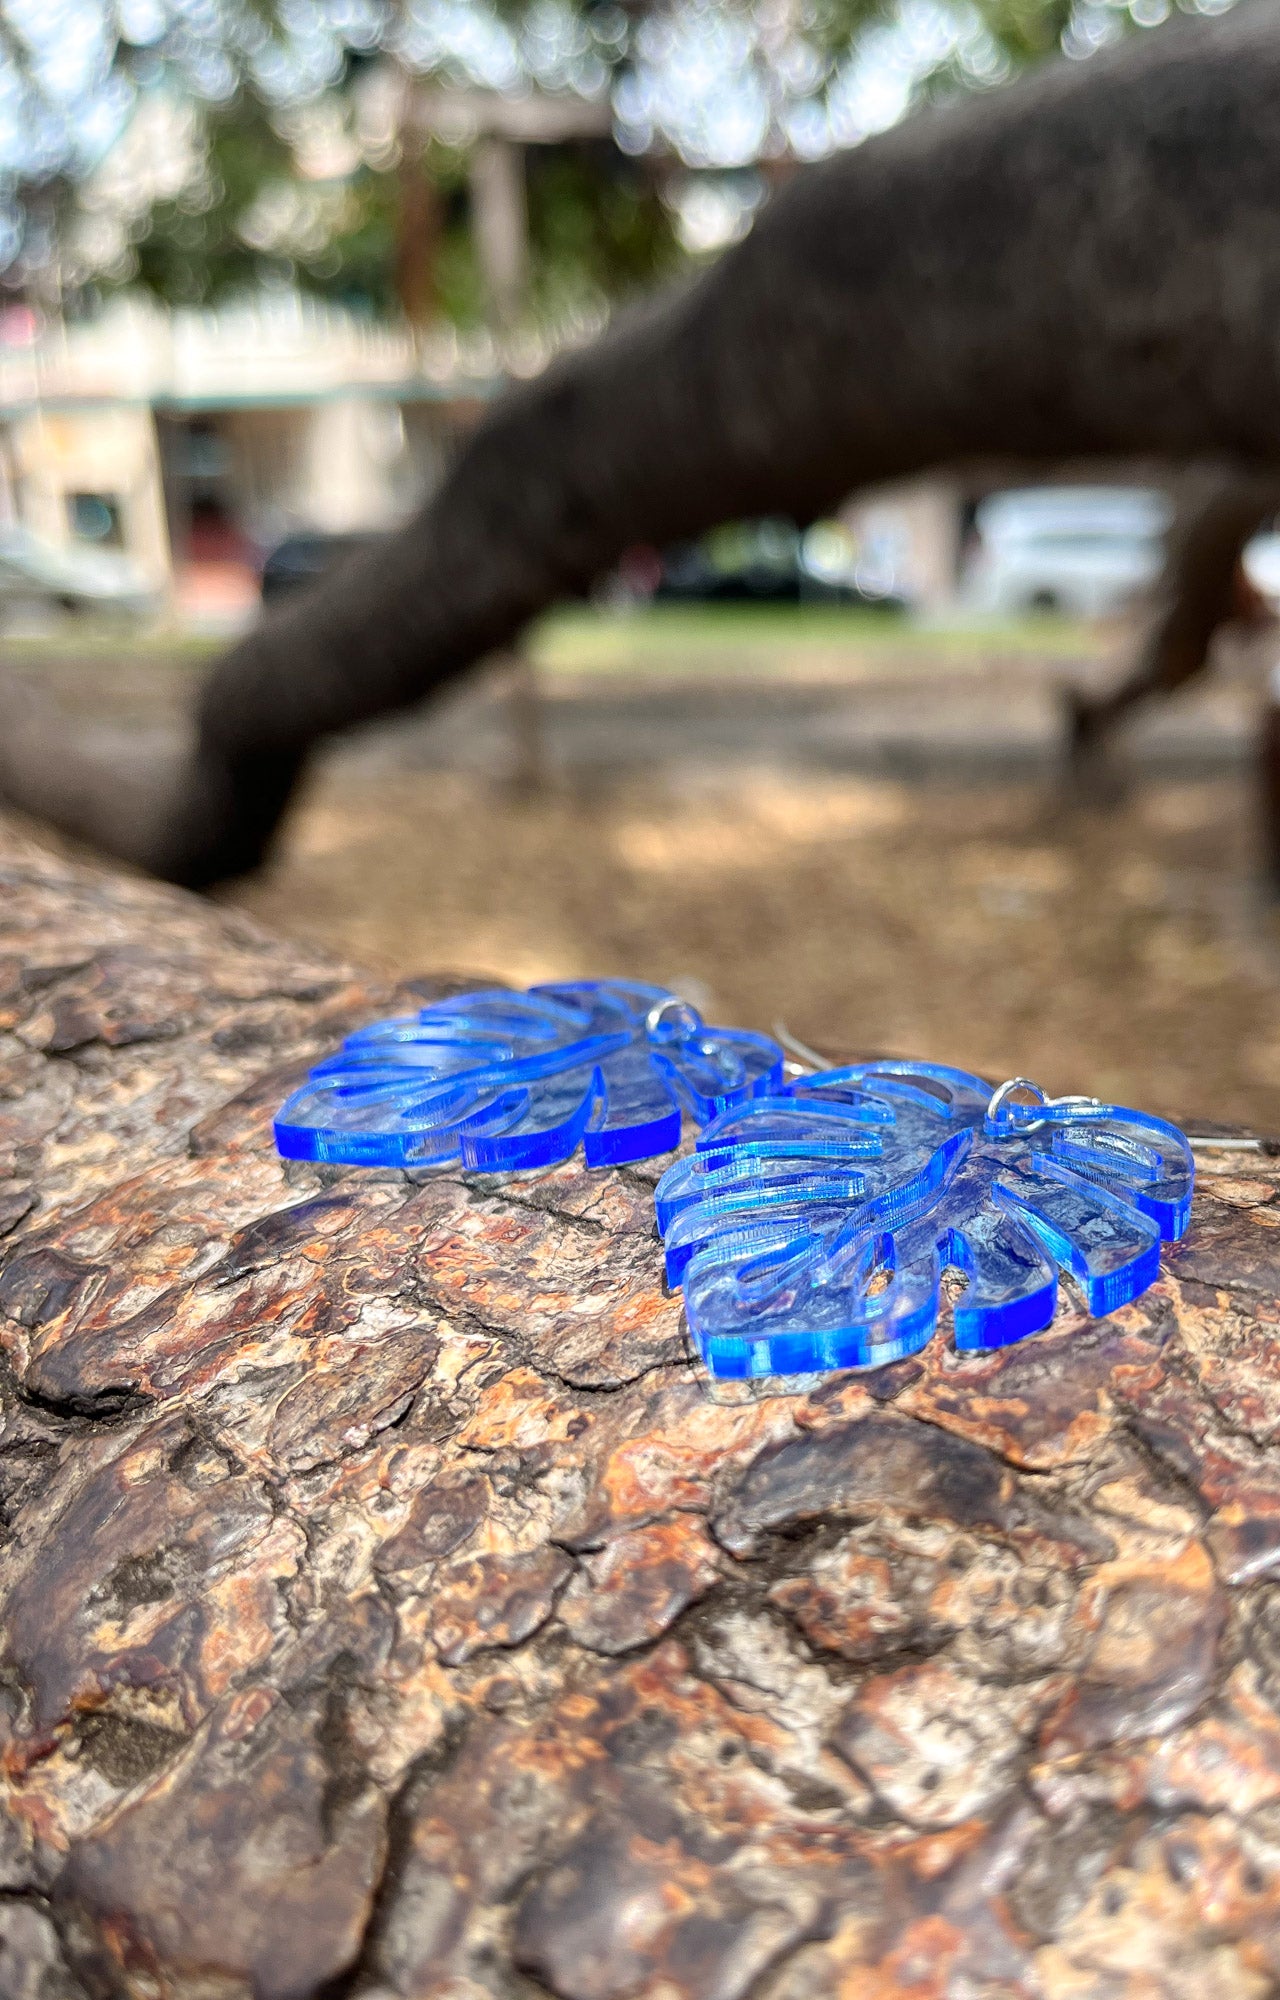 Blue Acrylic Earrings in the shape of a Monstera leaf. Approximately 1.5" x 1.6"